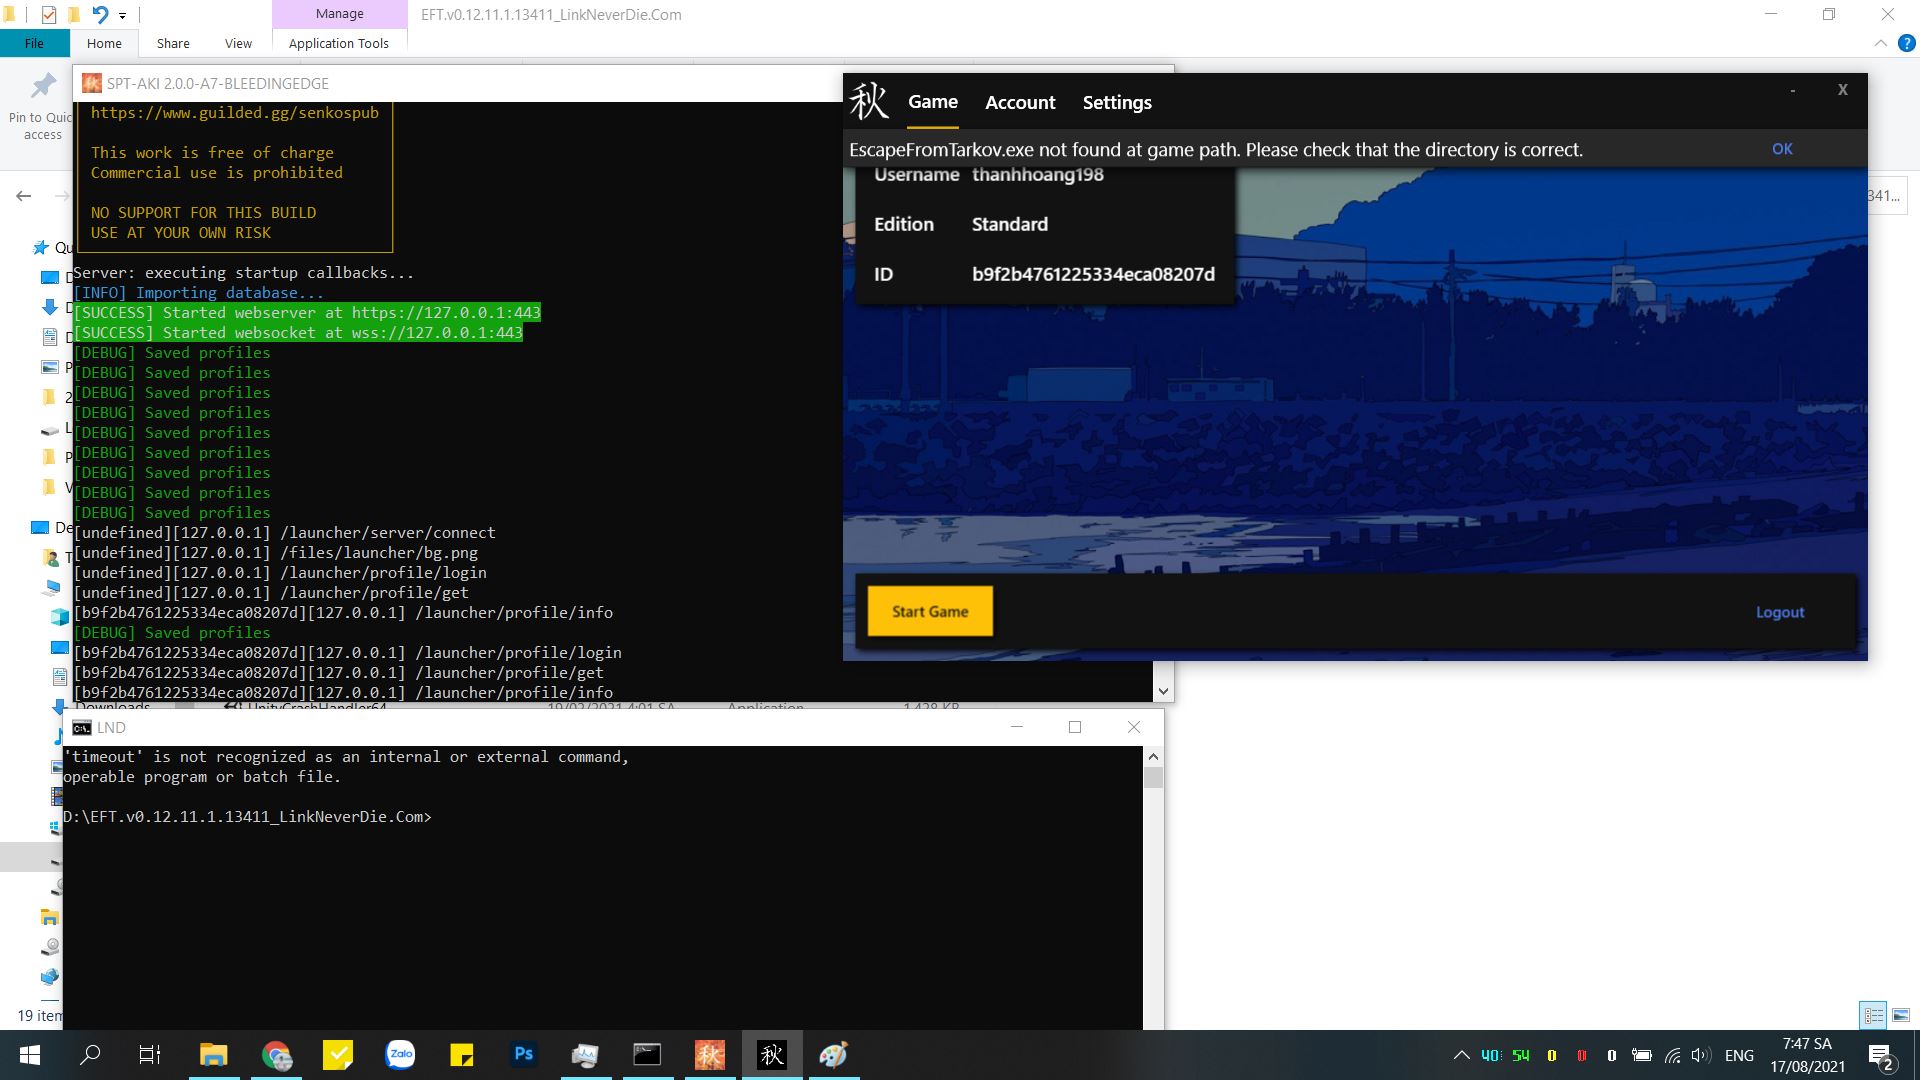 lỗi khi chơi game EscapefromTarkov.exe not found at game patch. Please check that the directory is correct